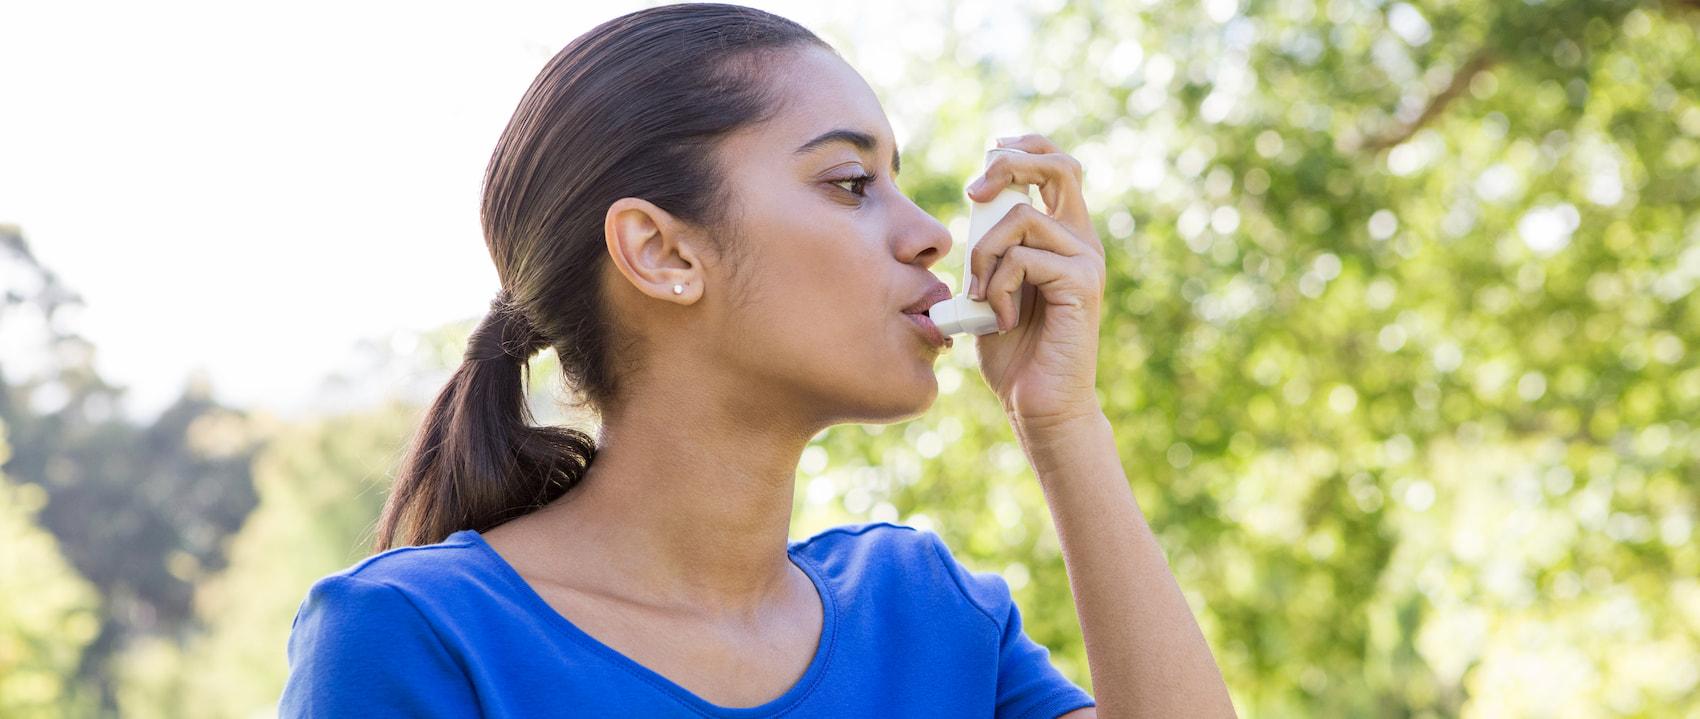 10 Essential Tips For Asthma Patients During Pandemic